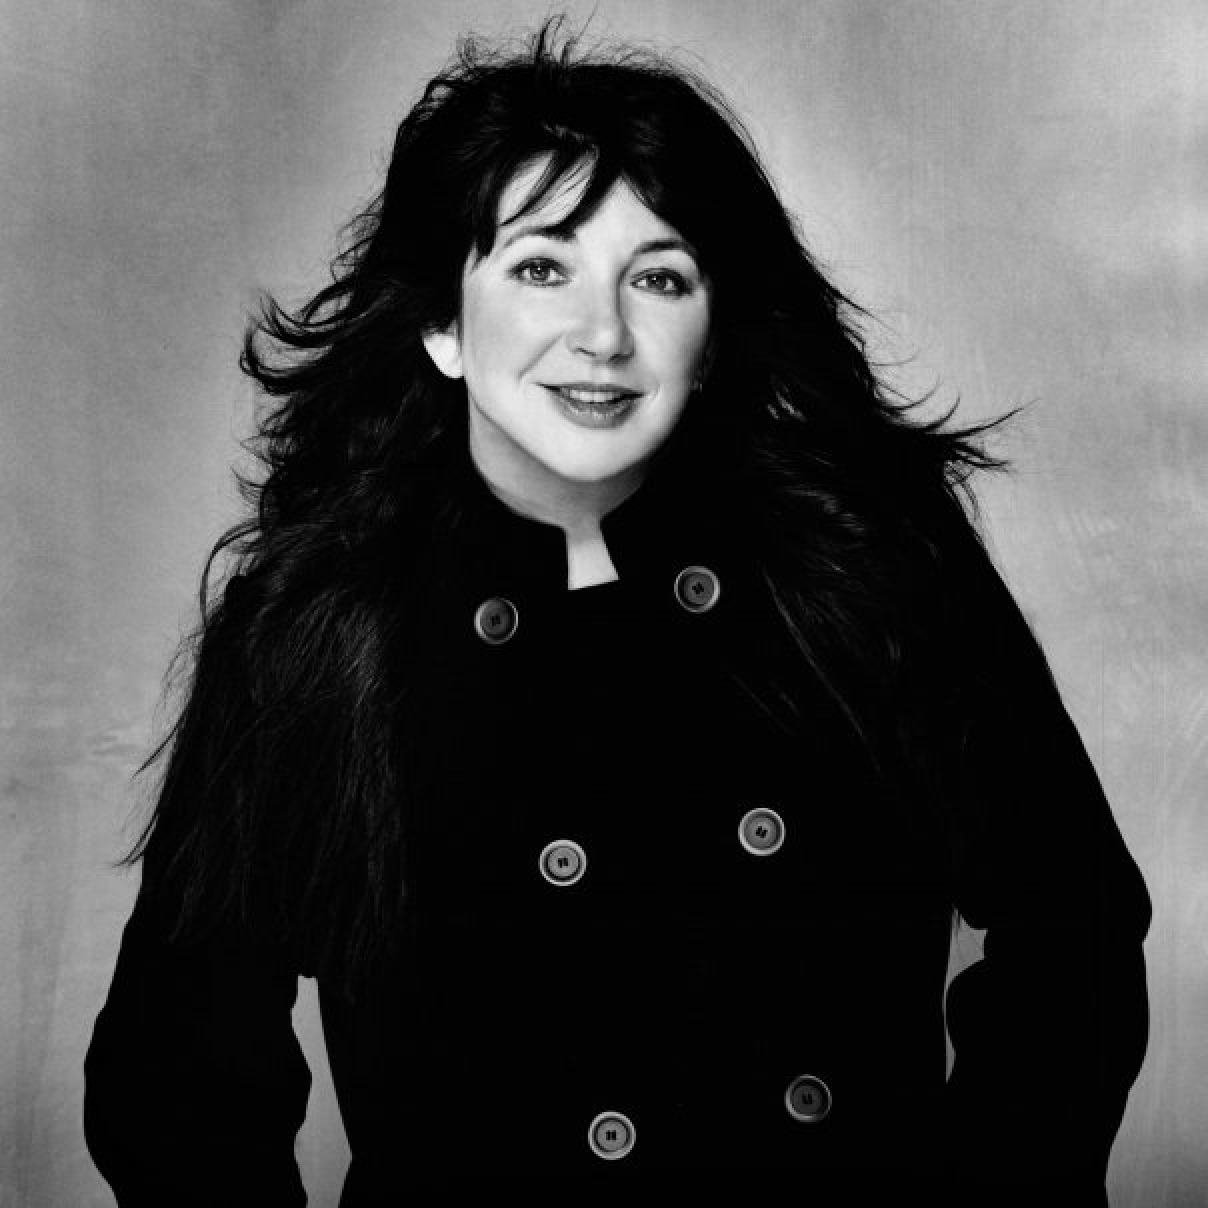 Whatever happened to Kate Bush, singer of Stranger Things hit song Running  Up That Hill? From her US$60 million net worth and reclusive lifestyle, to  her 1985 hit making a chart comeback